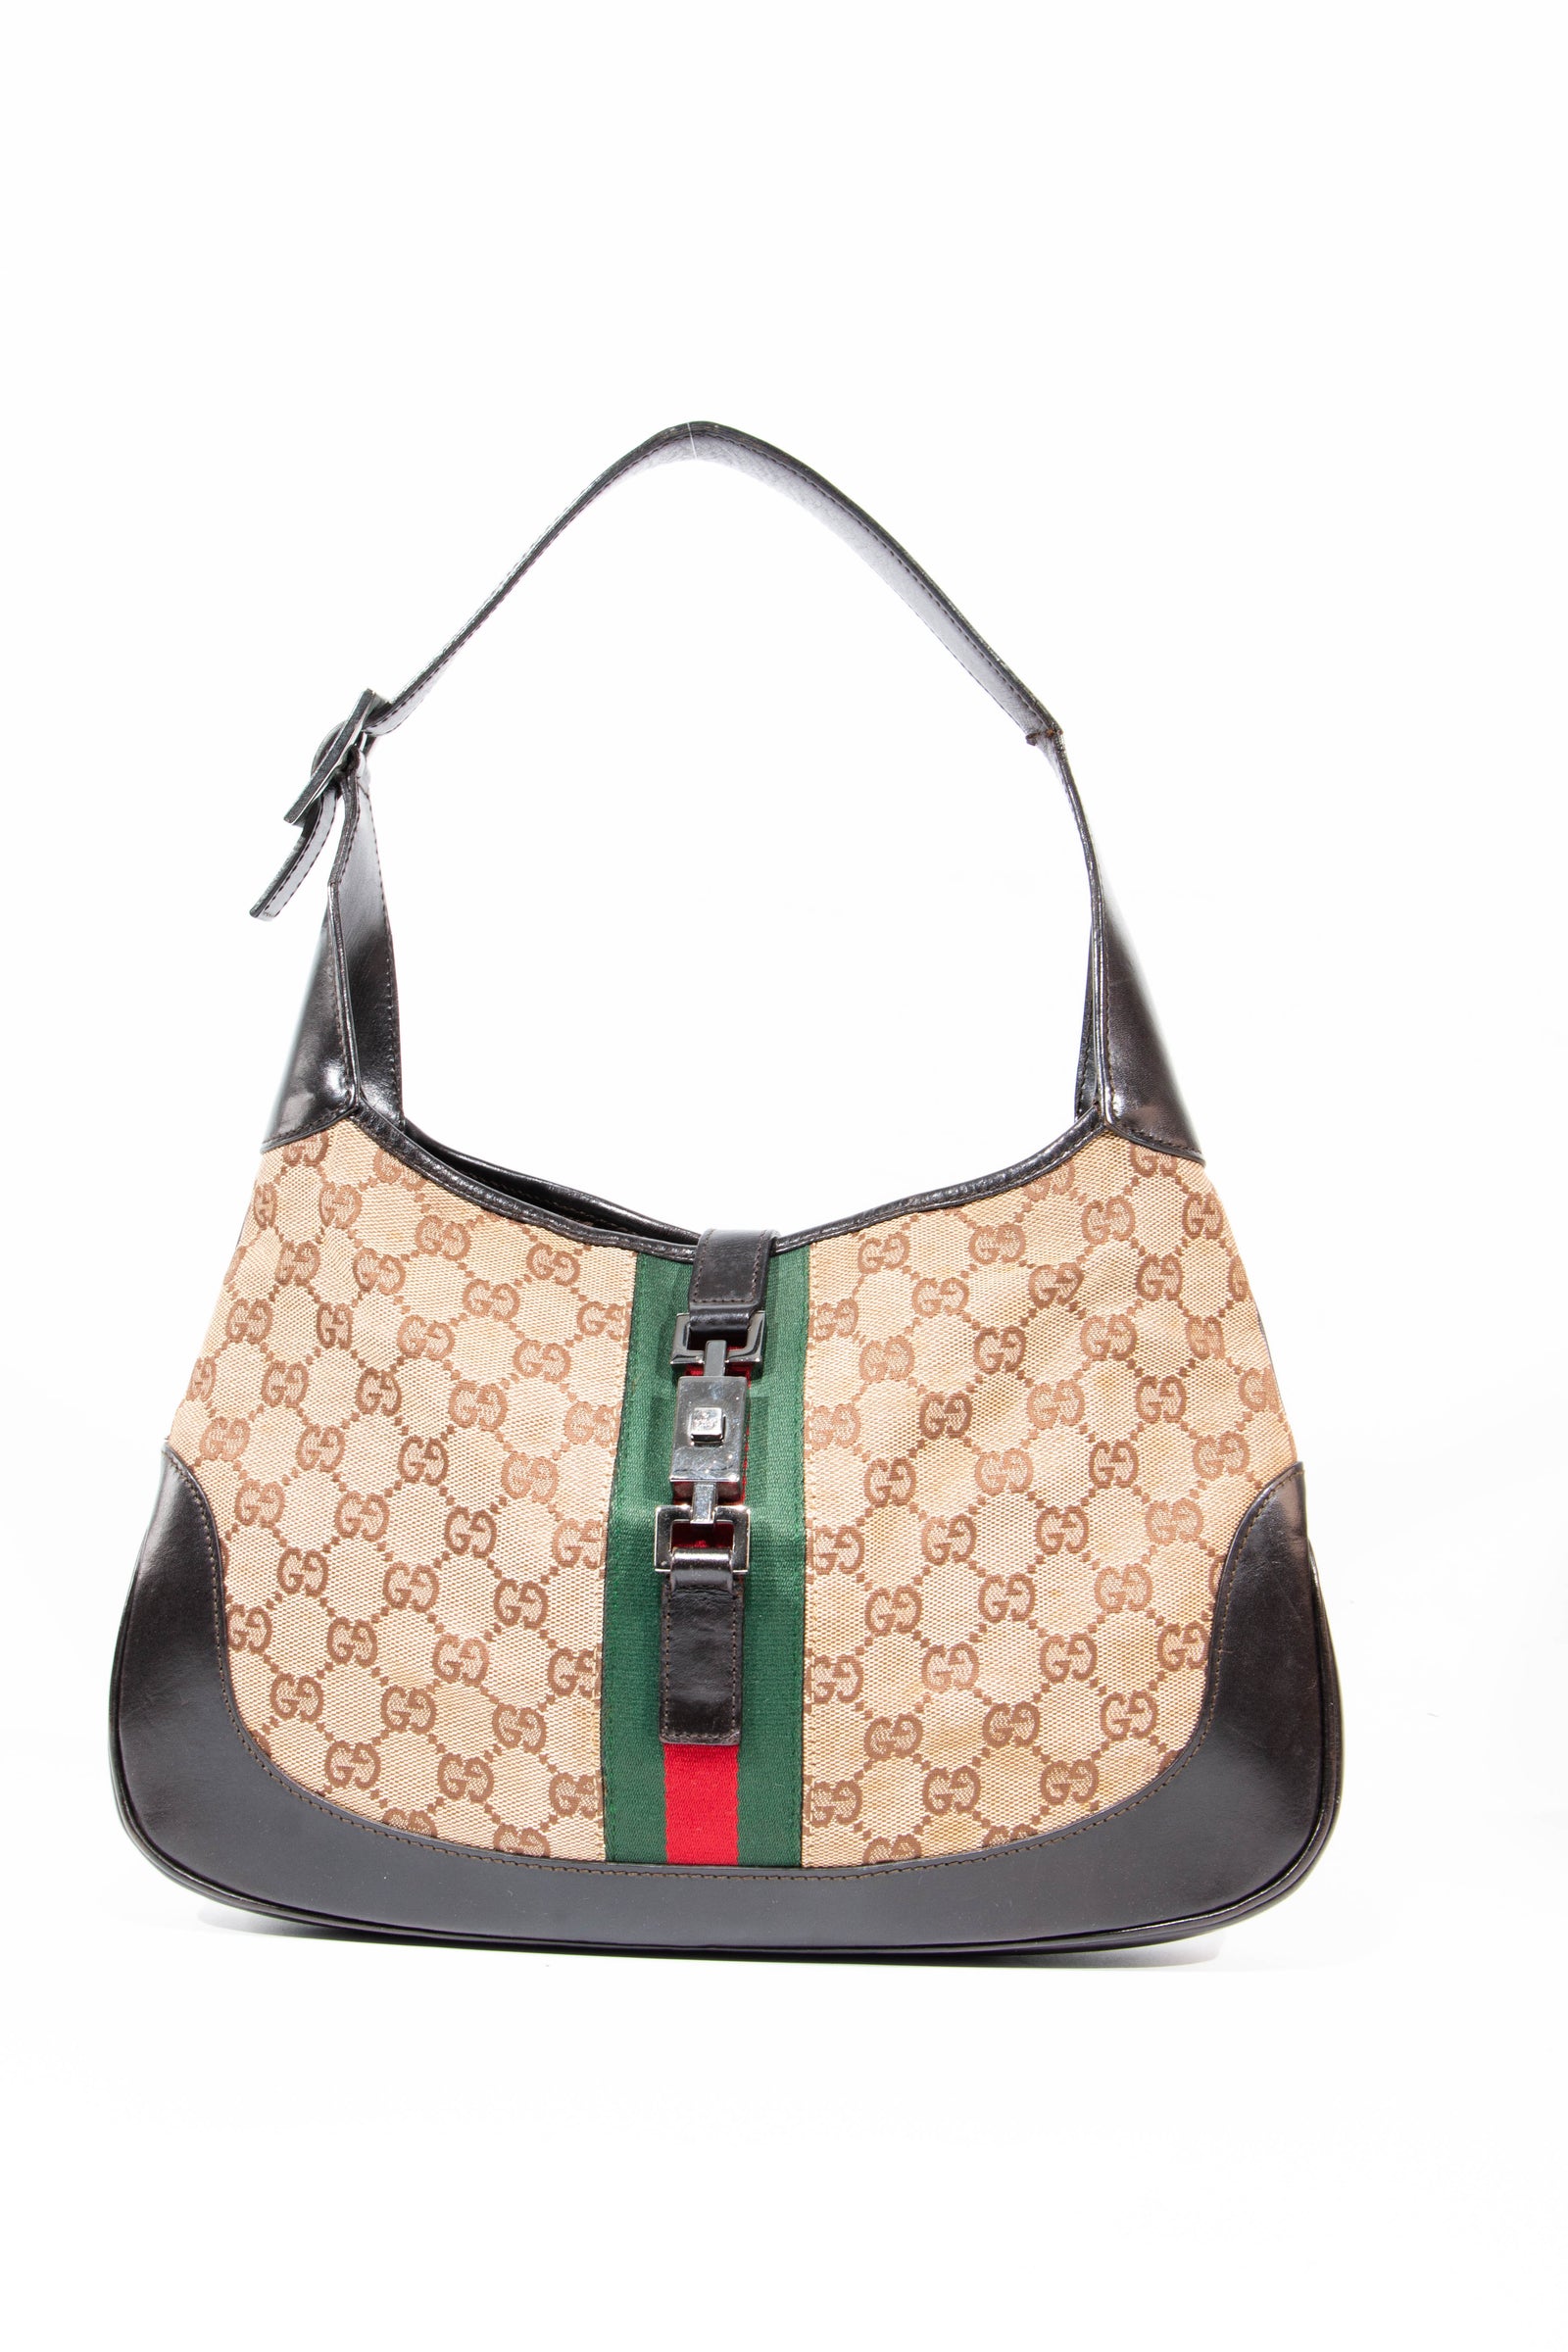 Discover the Gucci GG Supreme Messenger Bag: Impeccable Luxury and Sty